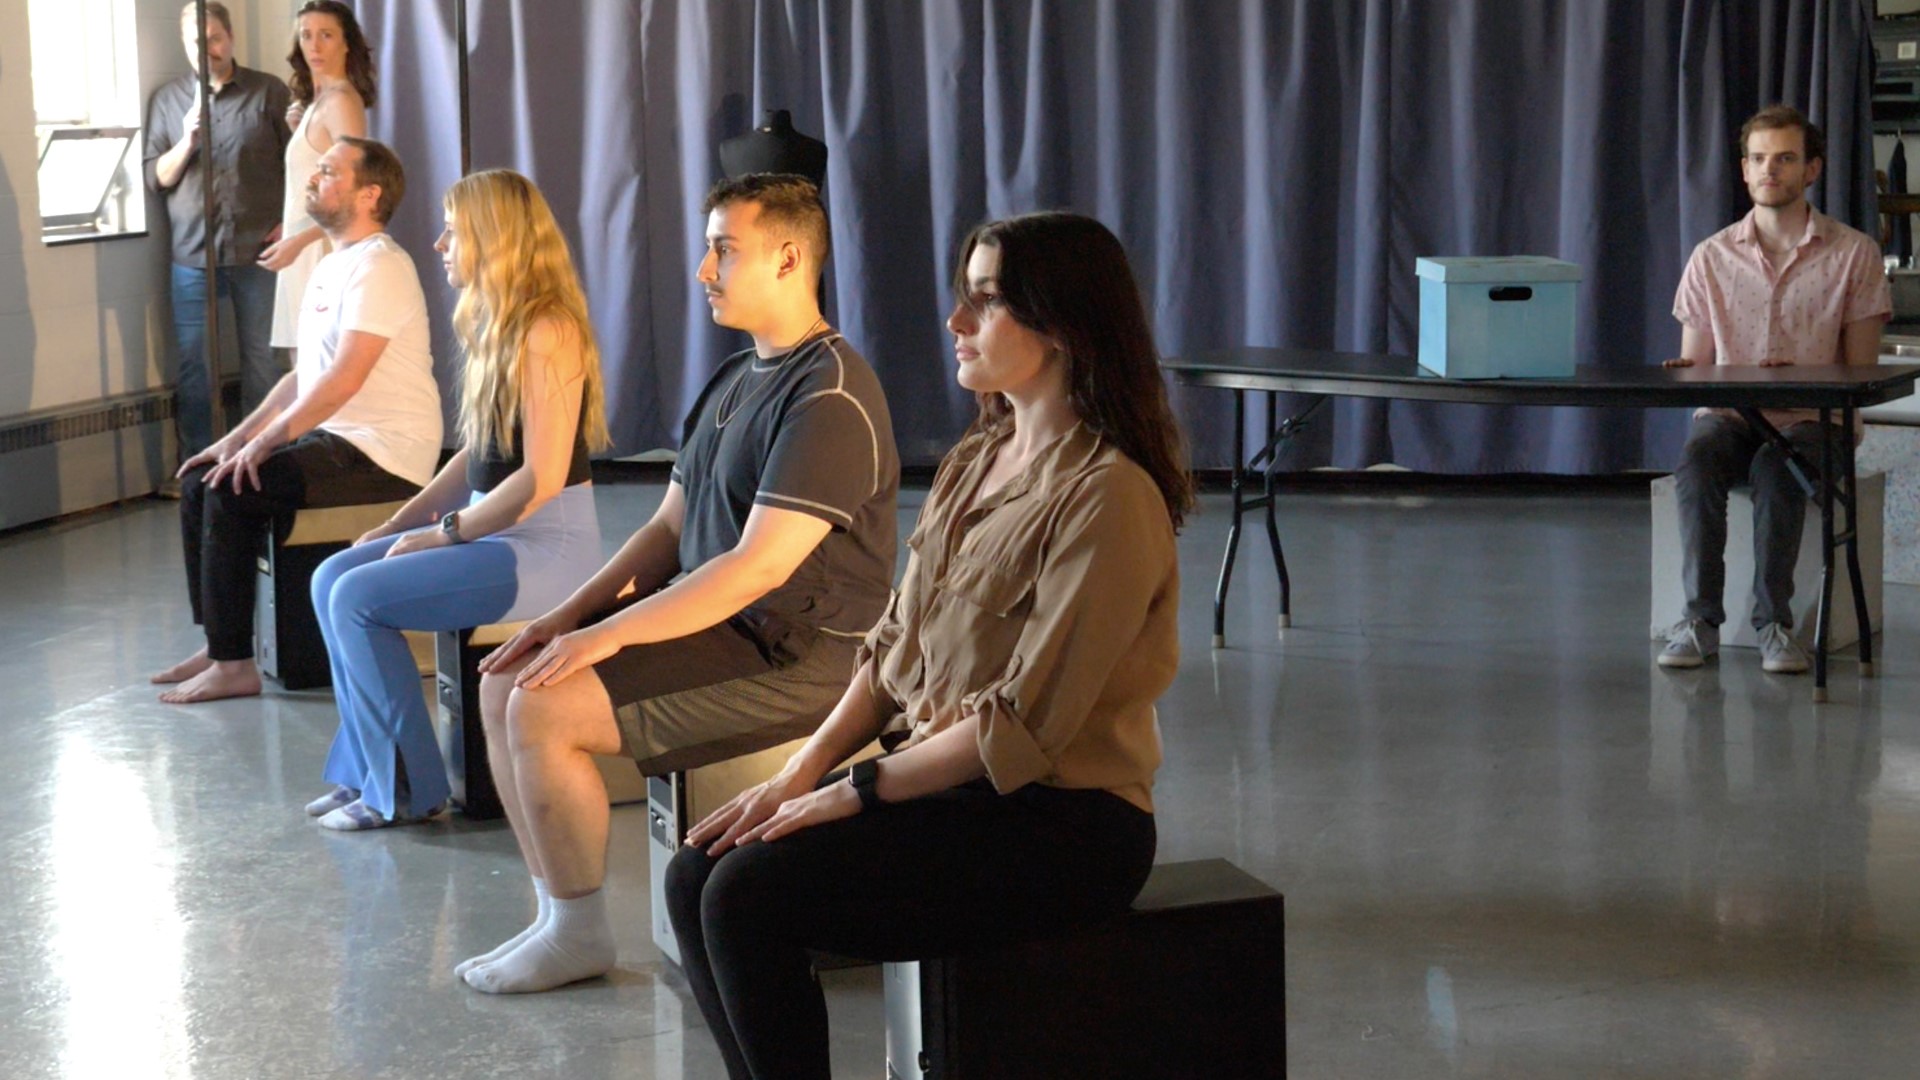 After each performance, The Sound Company works with their community partners to host conversations in the performance space about the issues at hand.